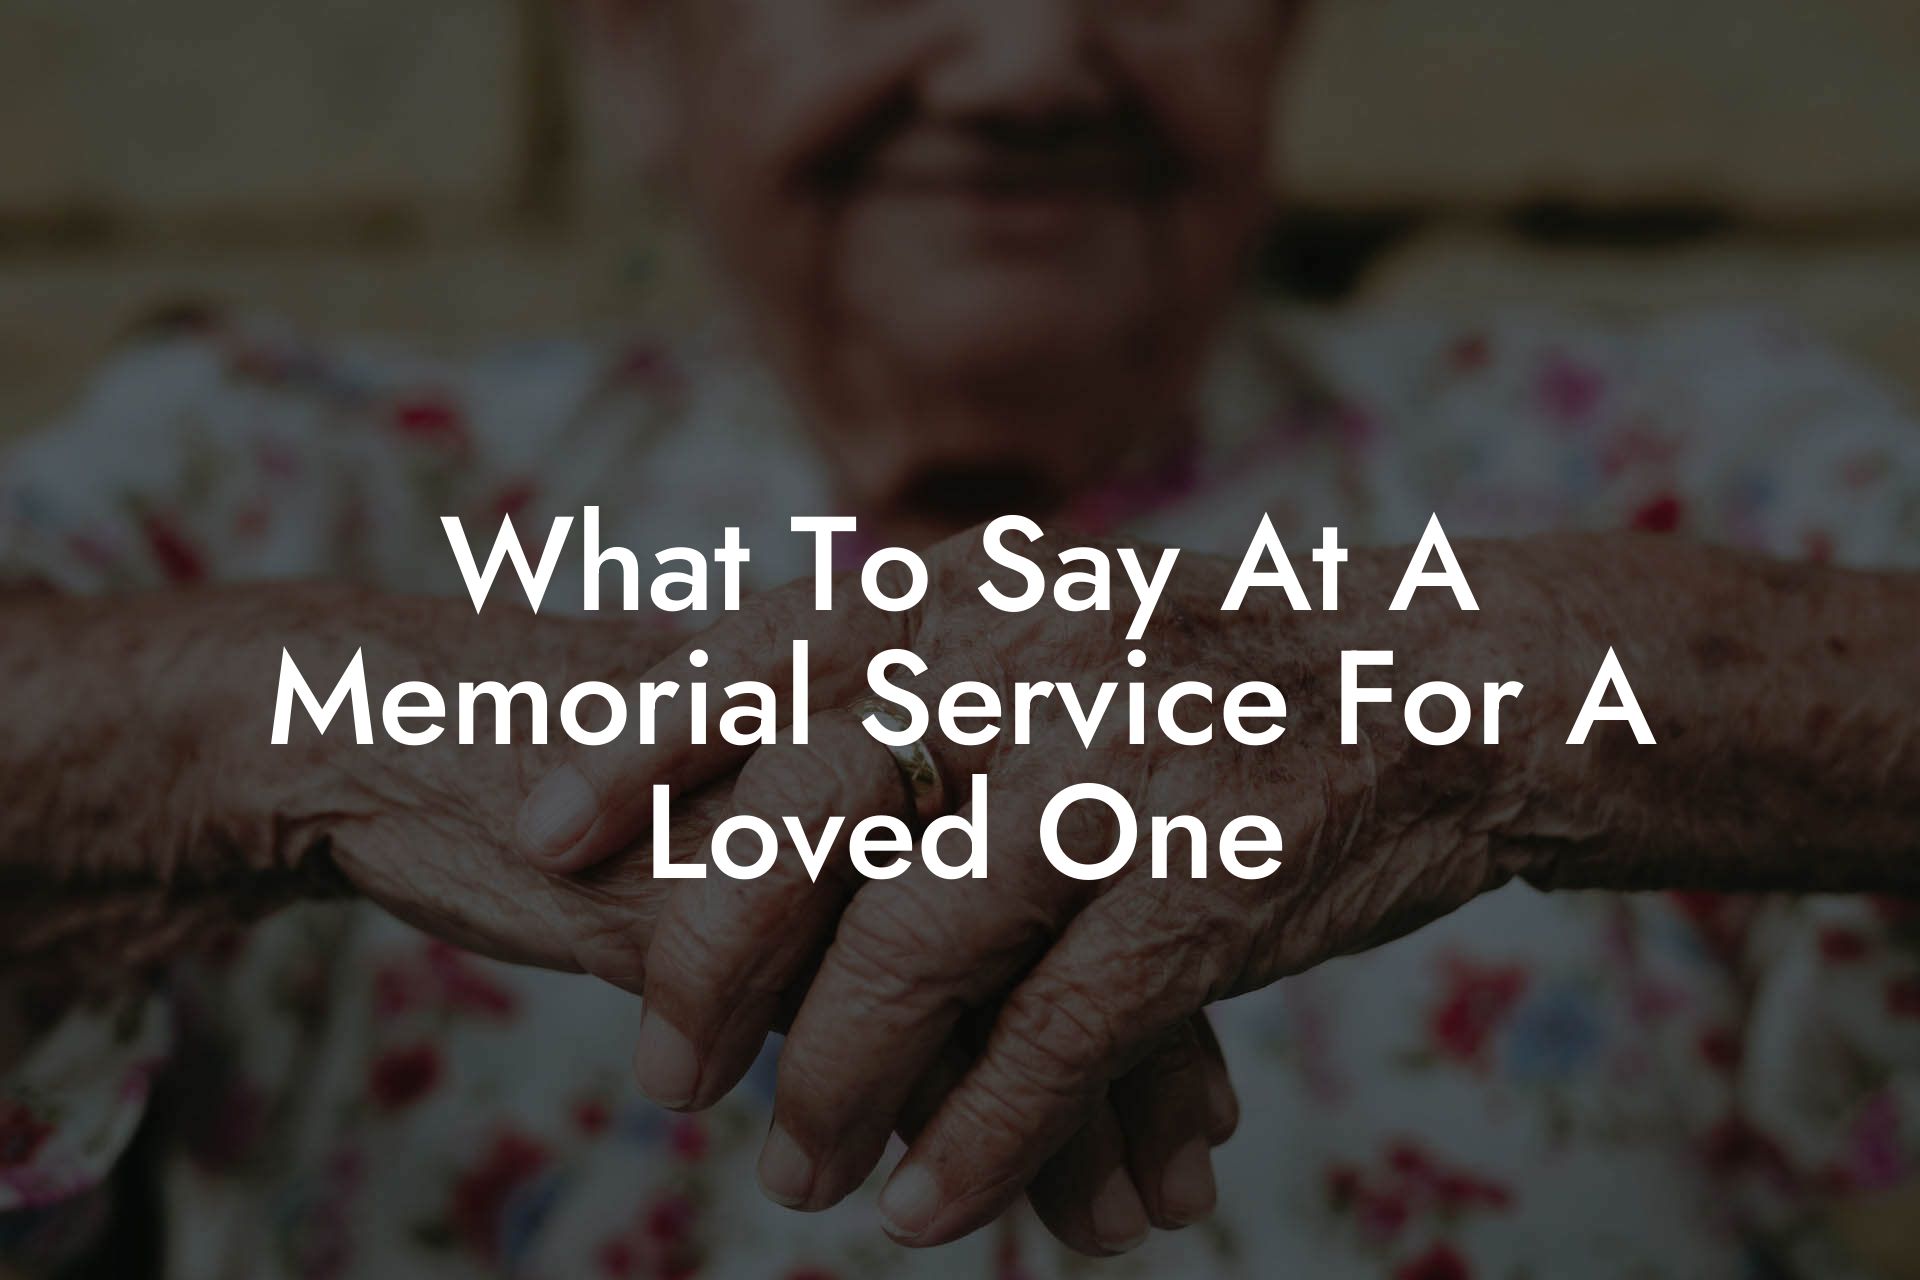 What To Say At A Memorial Service For A Loved One